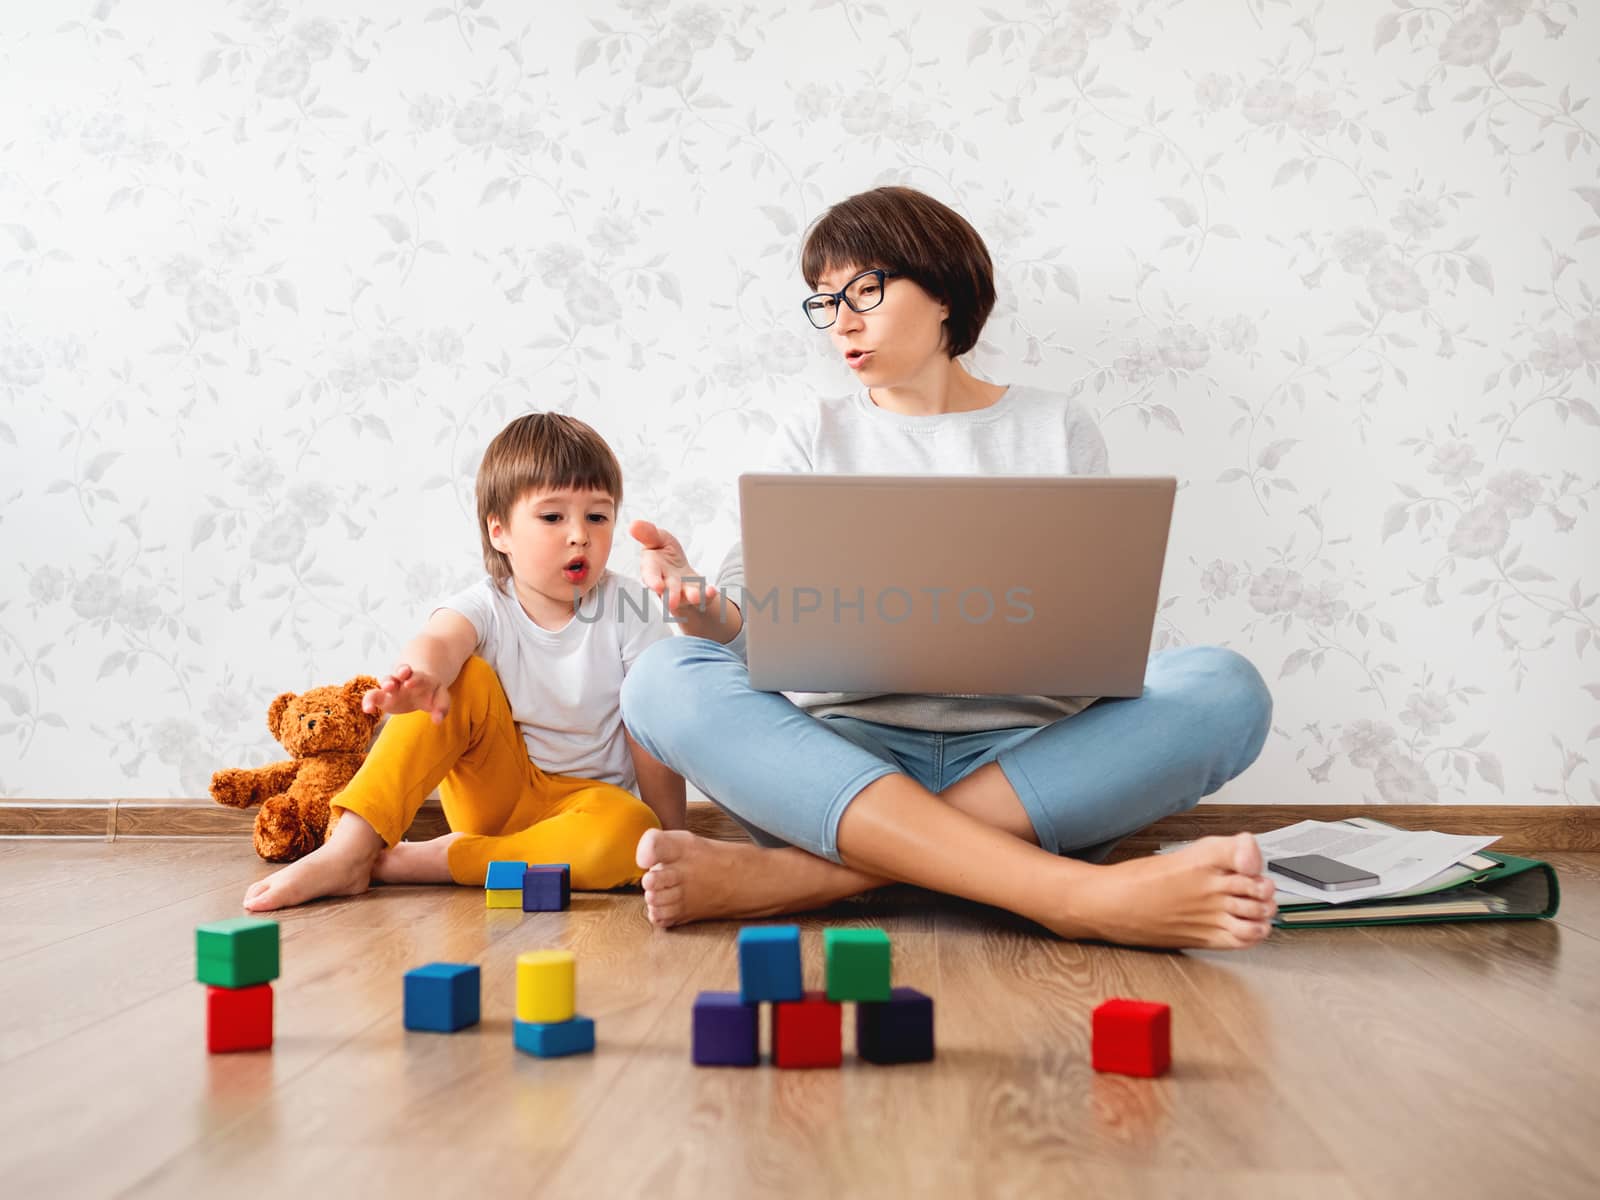 Mom and son argue at home quarantine because of coronavirus COVID19. Mother remote works with laptop, son plays with toy blocks. Self isolation at home. by aksenovko